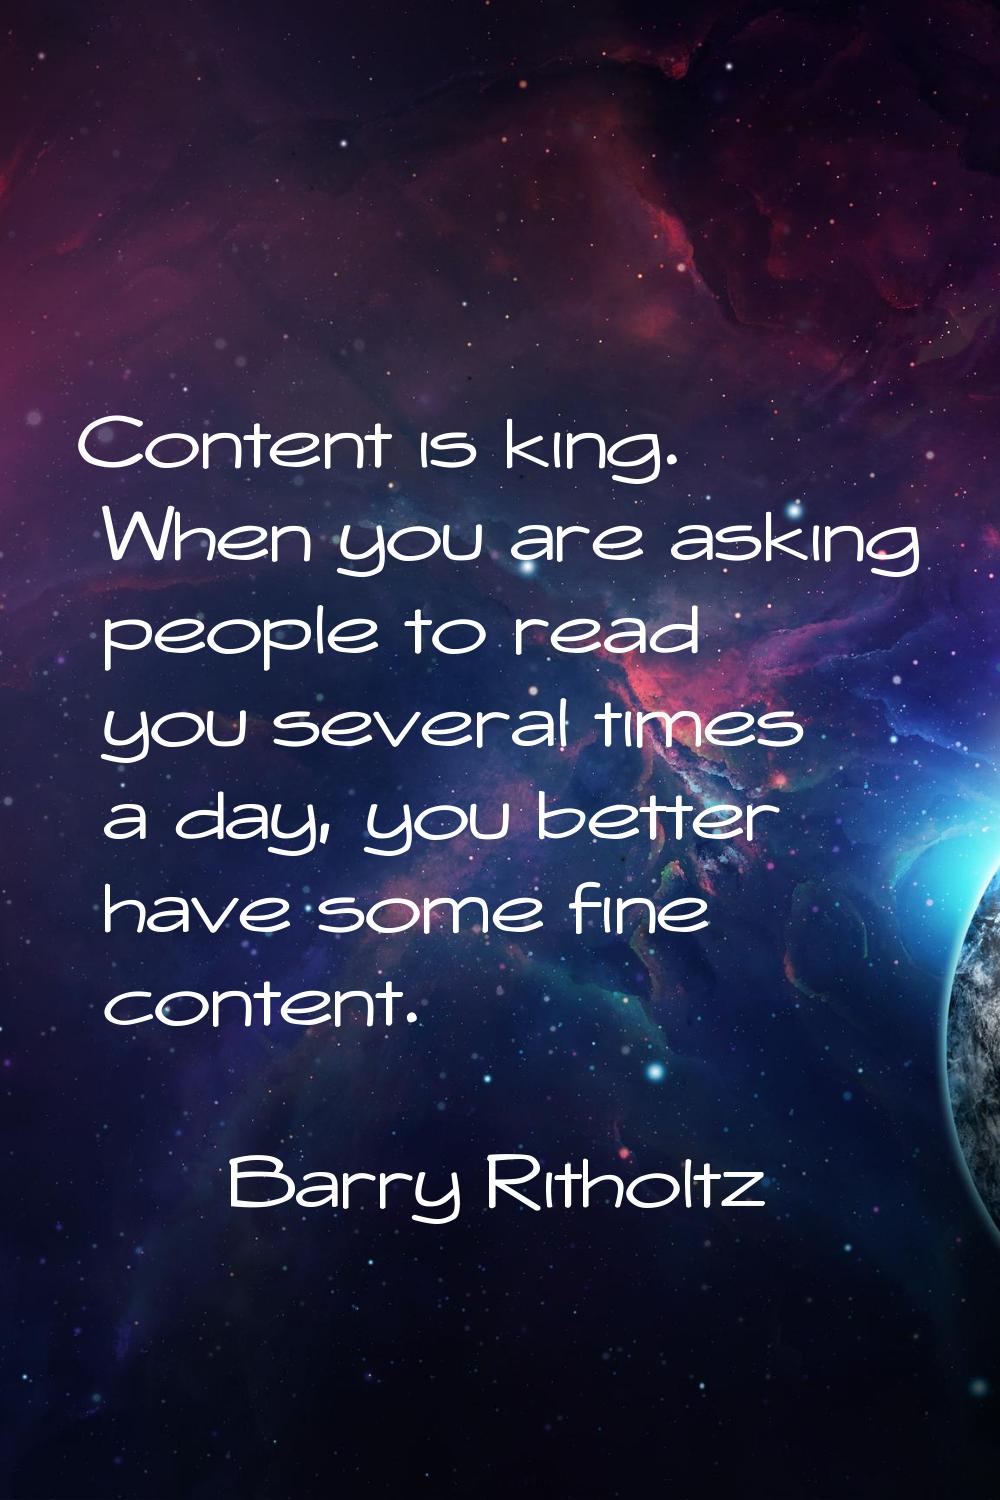 Content is king. When you are asking people to read you several times a day, you better have some f